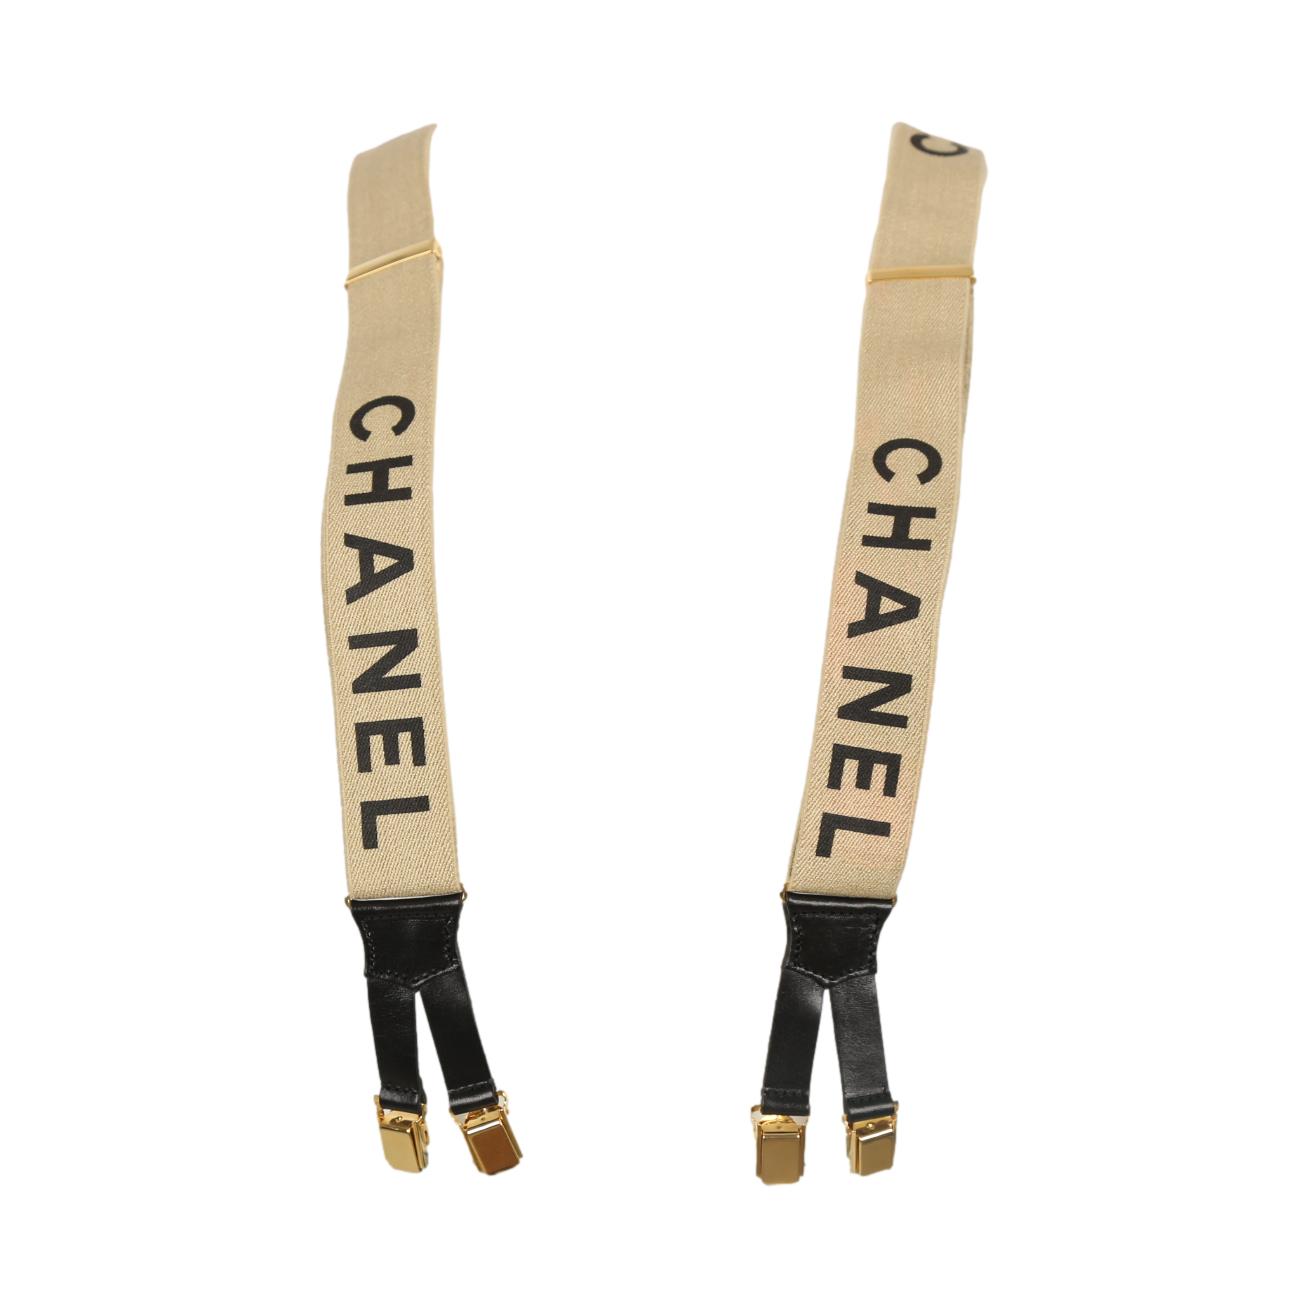 Sold at Auction: Chanel Suspenders Black White